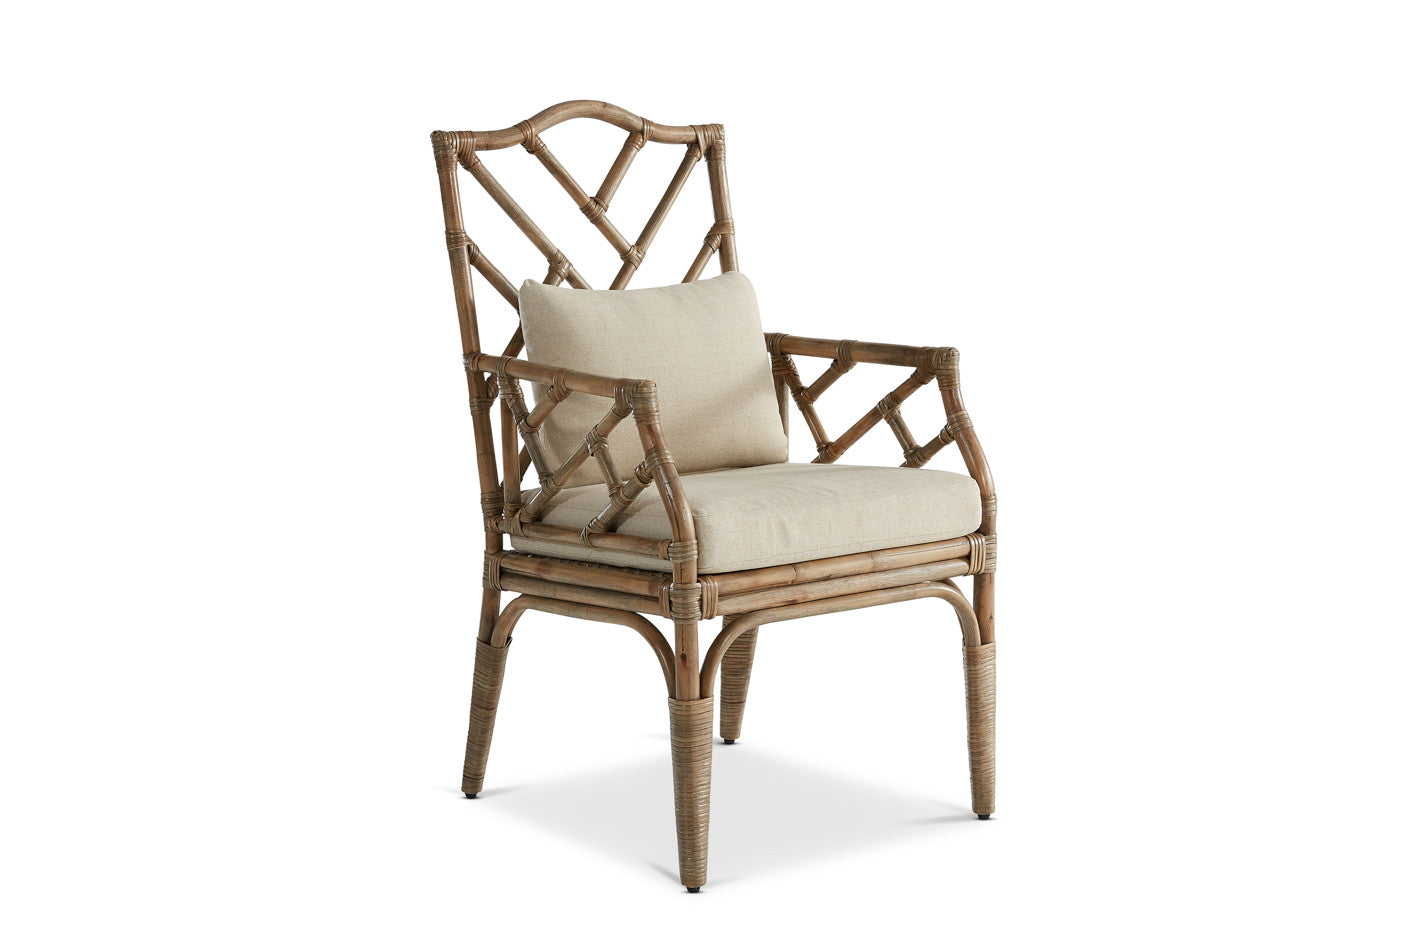 Ming Rattan Dining Chair with Arms - WisteriaDesign